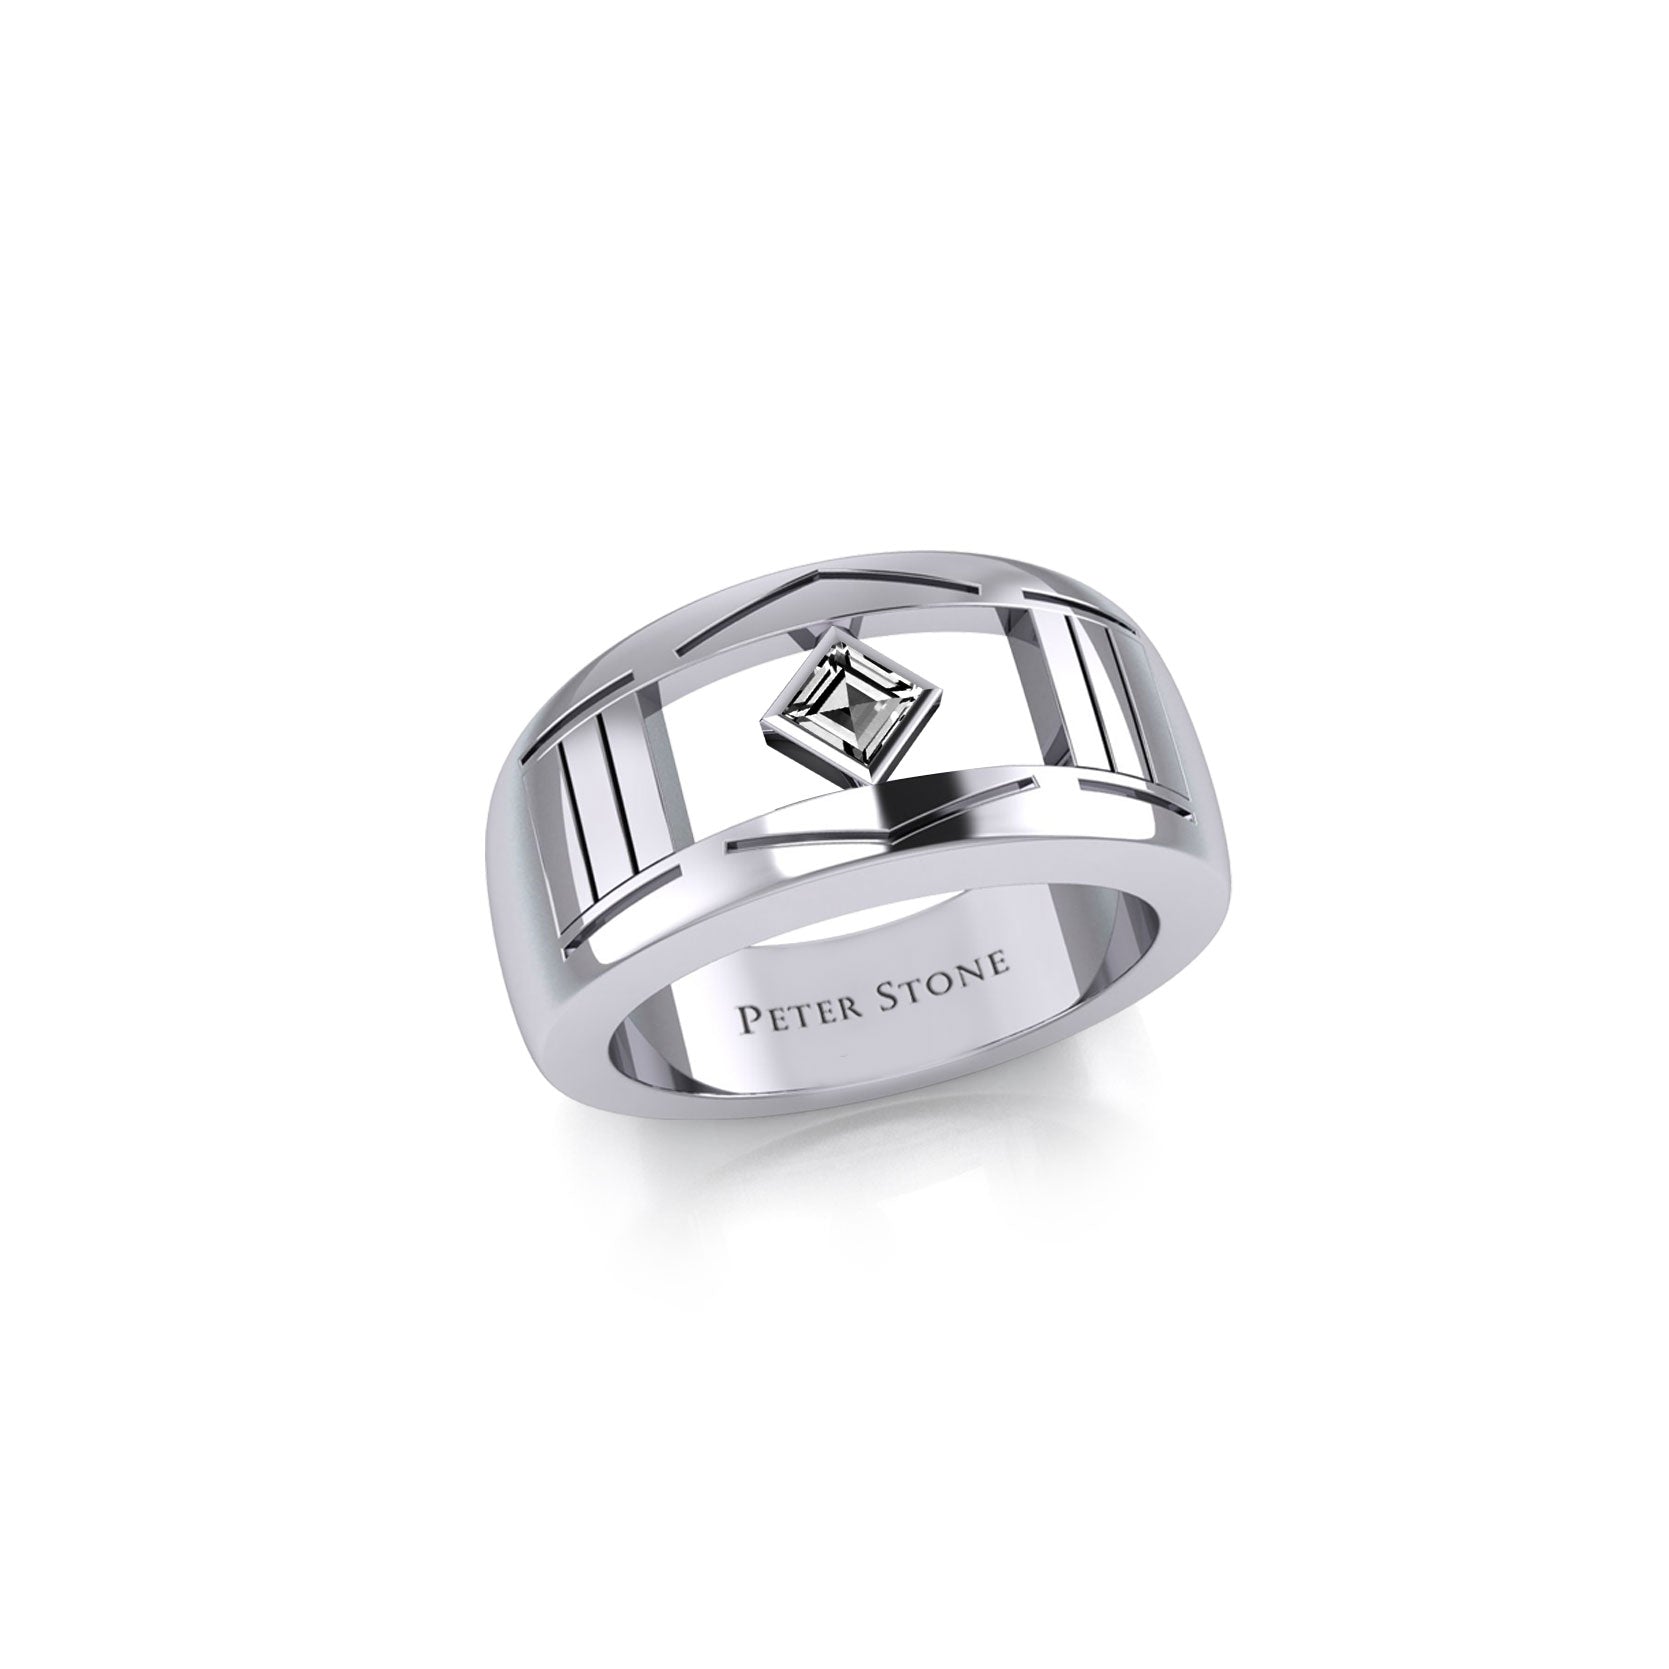 The Modern Silver Band Ring with Square Gemstone NA Symbol TRI2437